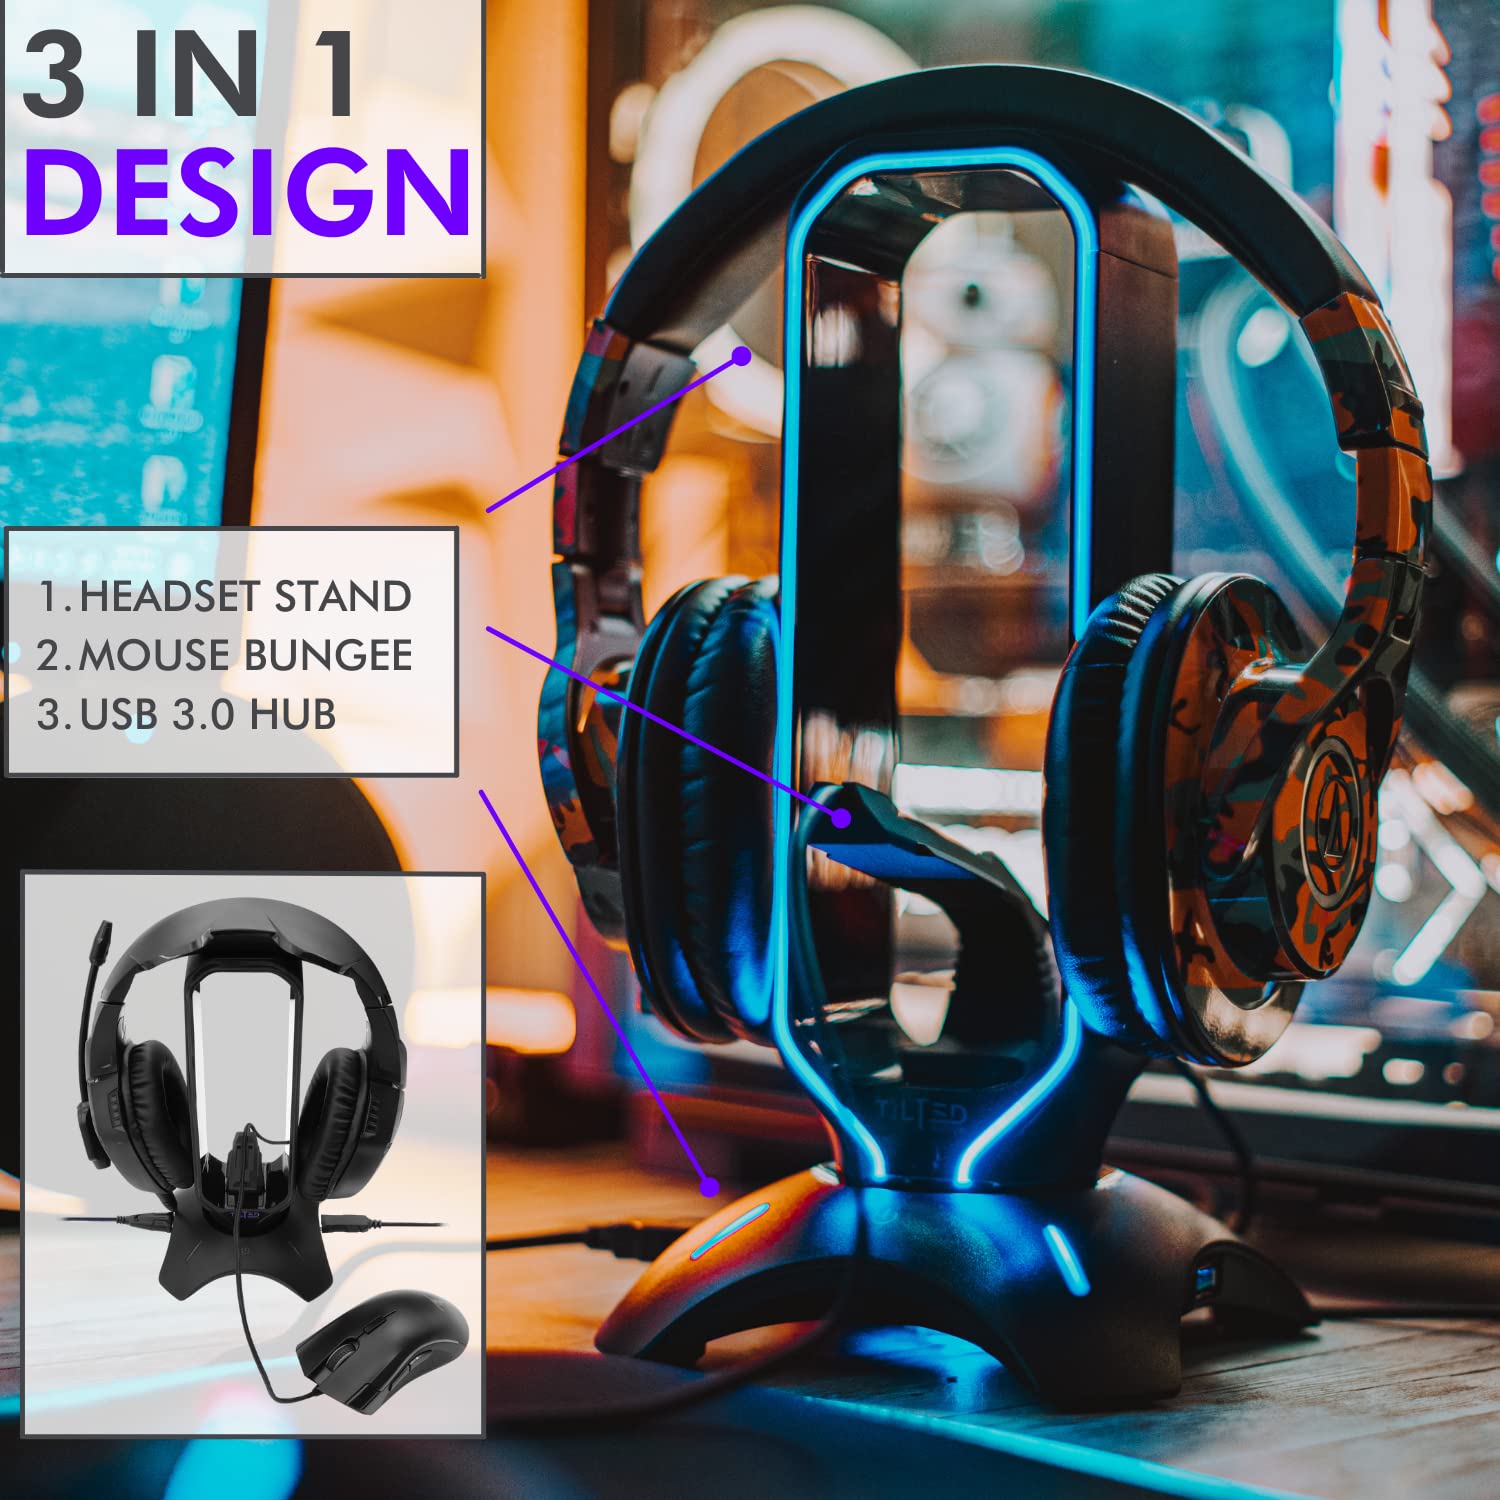 Tilted Nation RGB Headset Stand and Gaming Headphone Stand for Desk Display with Mouse Bungee Cord Holder - Gaming Headset Holder with USB 3.0 Hub for Xbox, PS4, PC - Perfect Gaming Accessories Gift